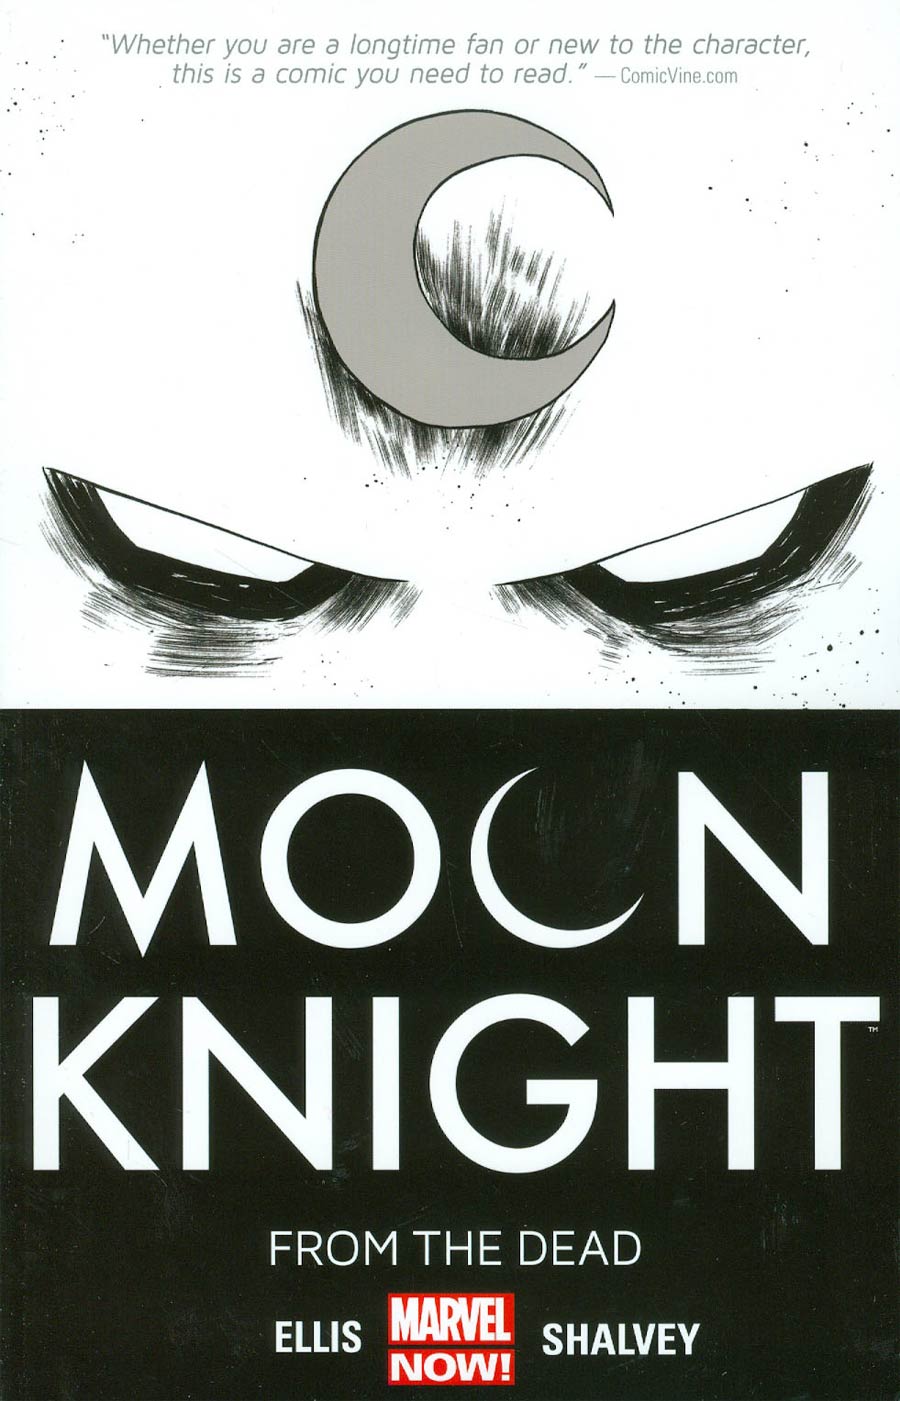 Moon Knight (2014) Vol 1 From The Dead TP